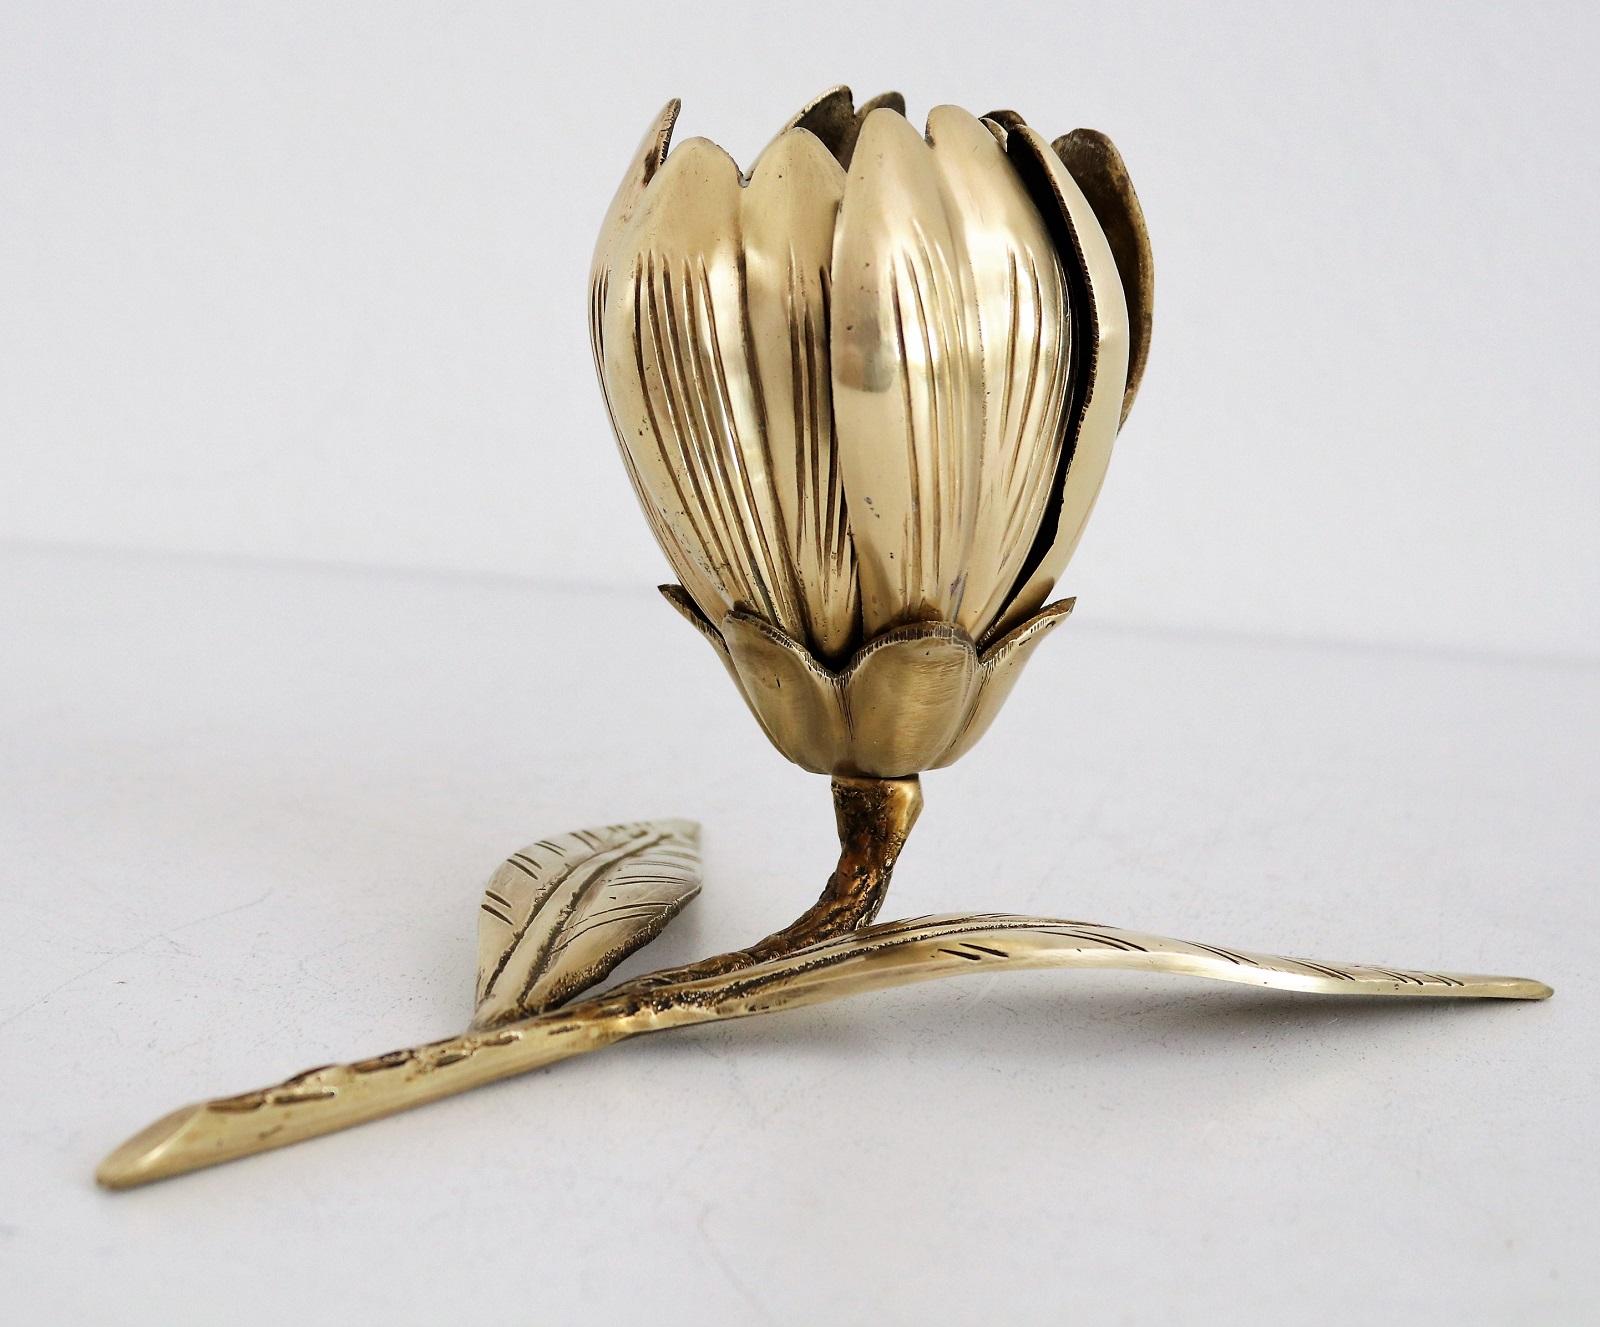 Beautiful flower made of full brass removable petals ashtrays from the midcentury.
Made in Italy.
The 6 petals of the flower are removeable easily and when flipped over become ashtrays.
They can be composed as an open flower or as a closed